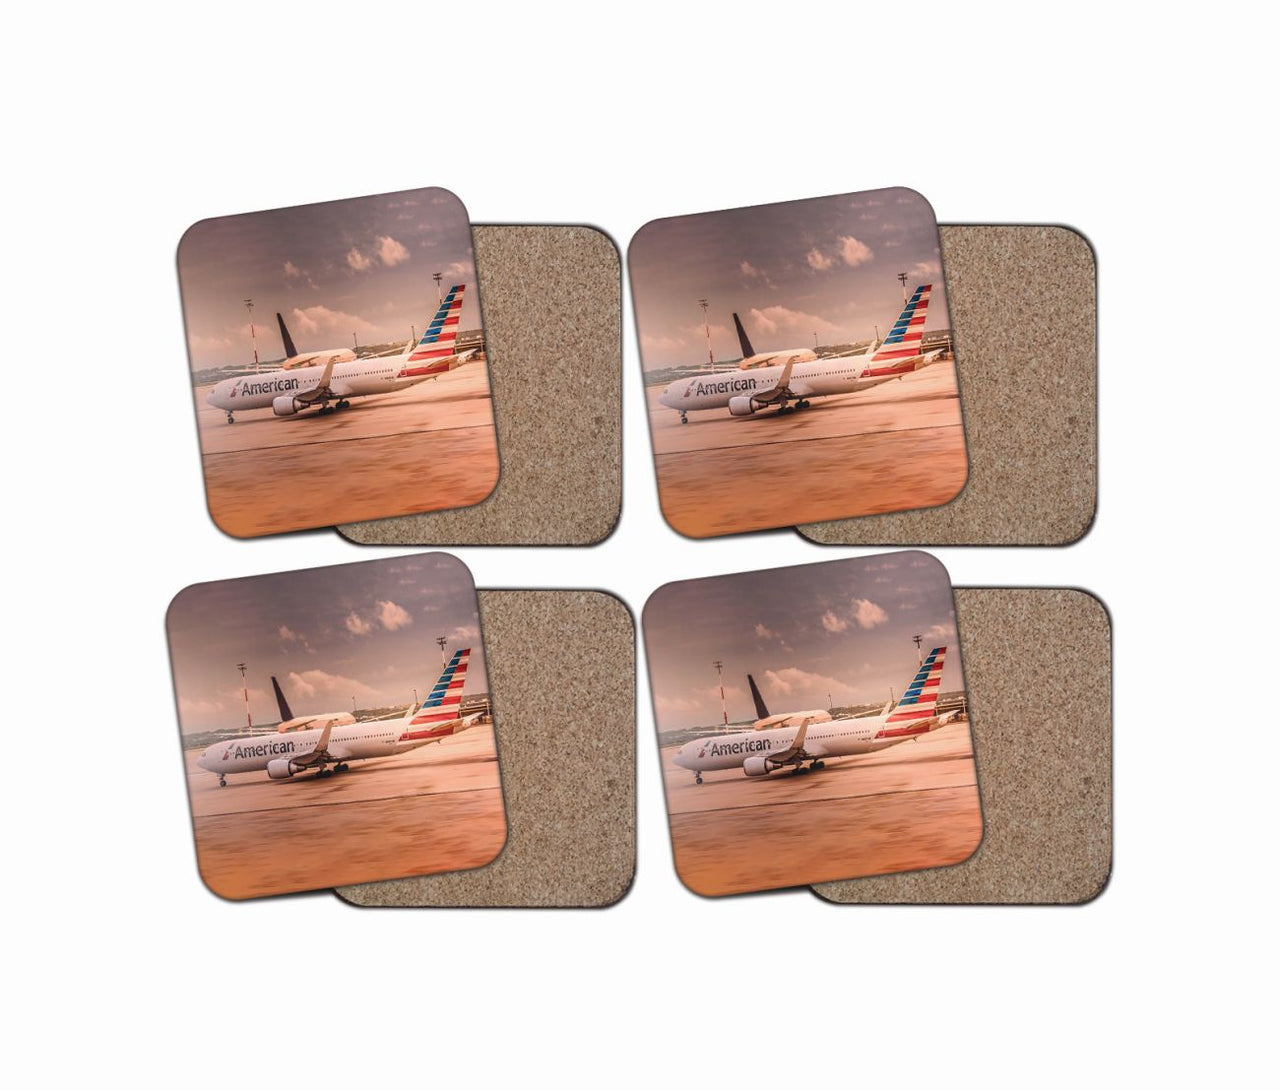 American Airlines Boeing 767 Designed Coasters